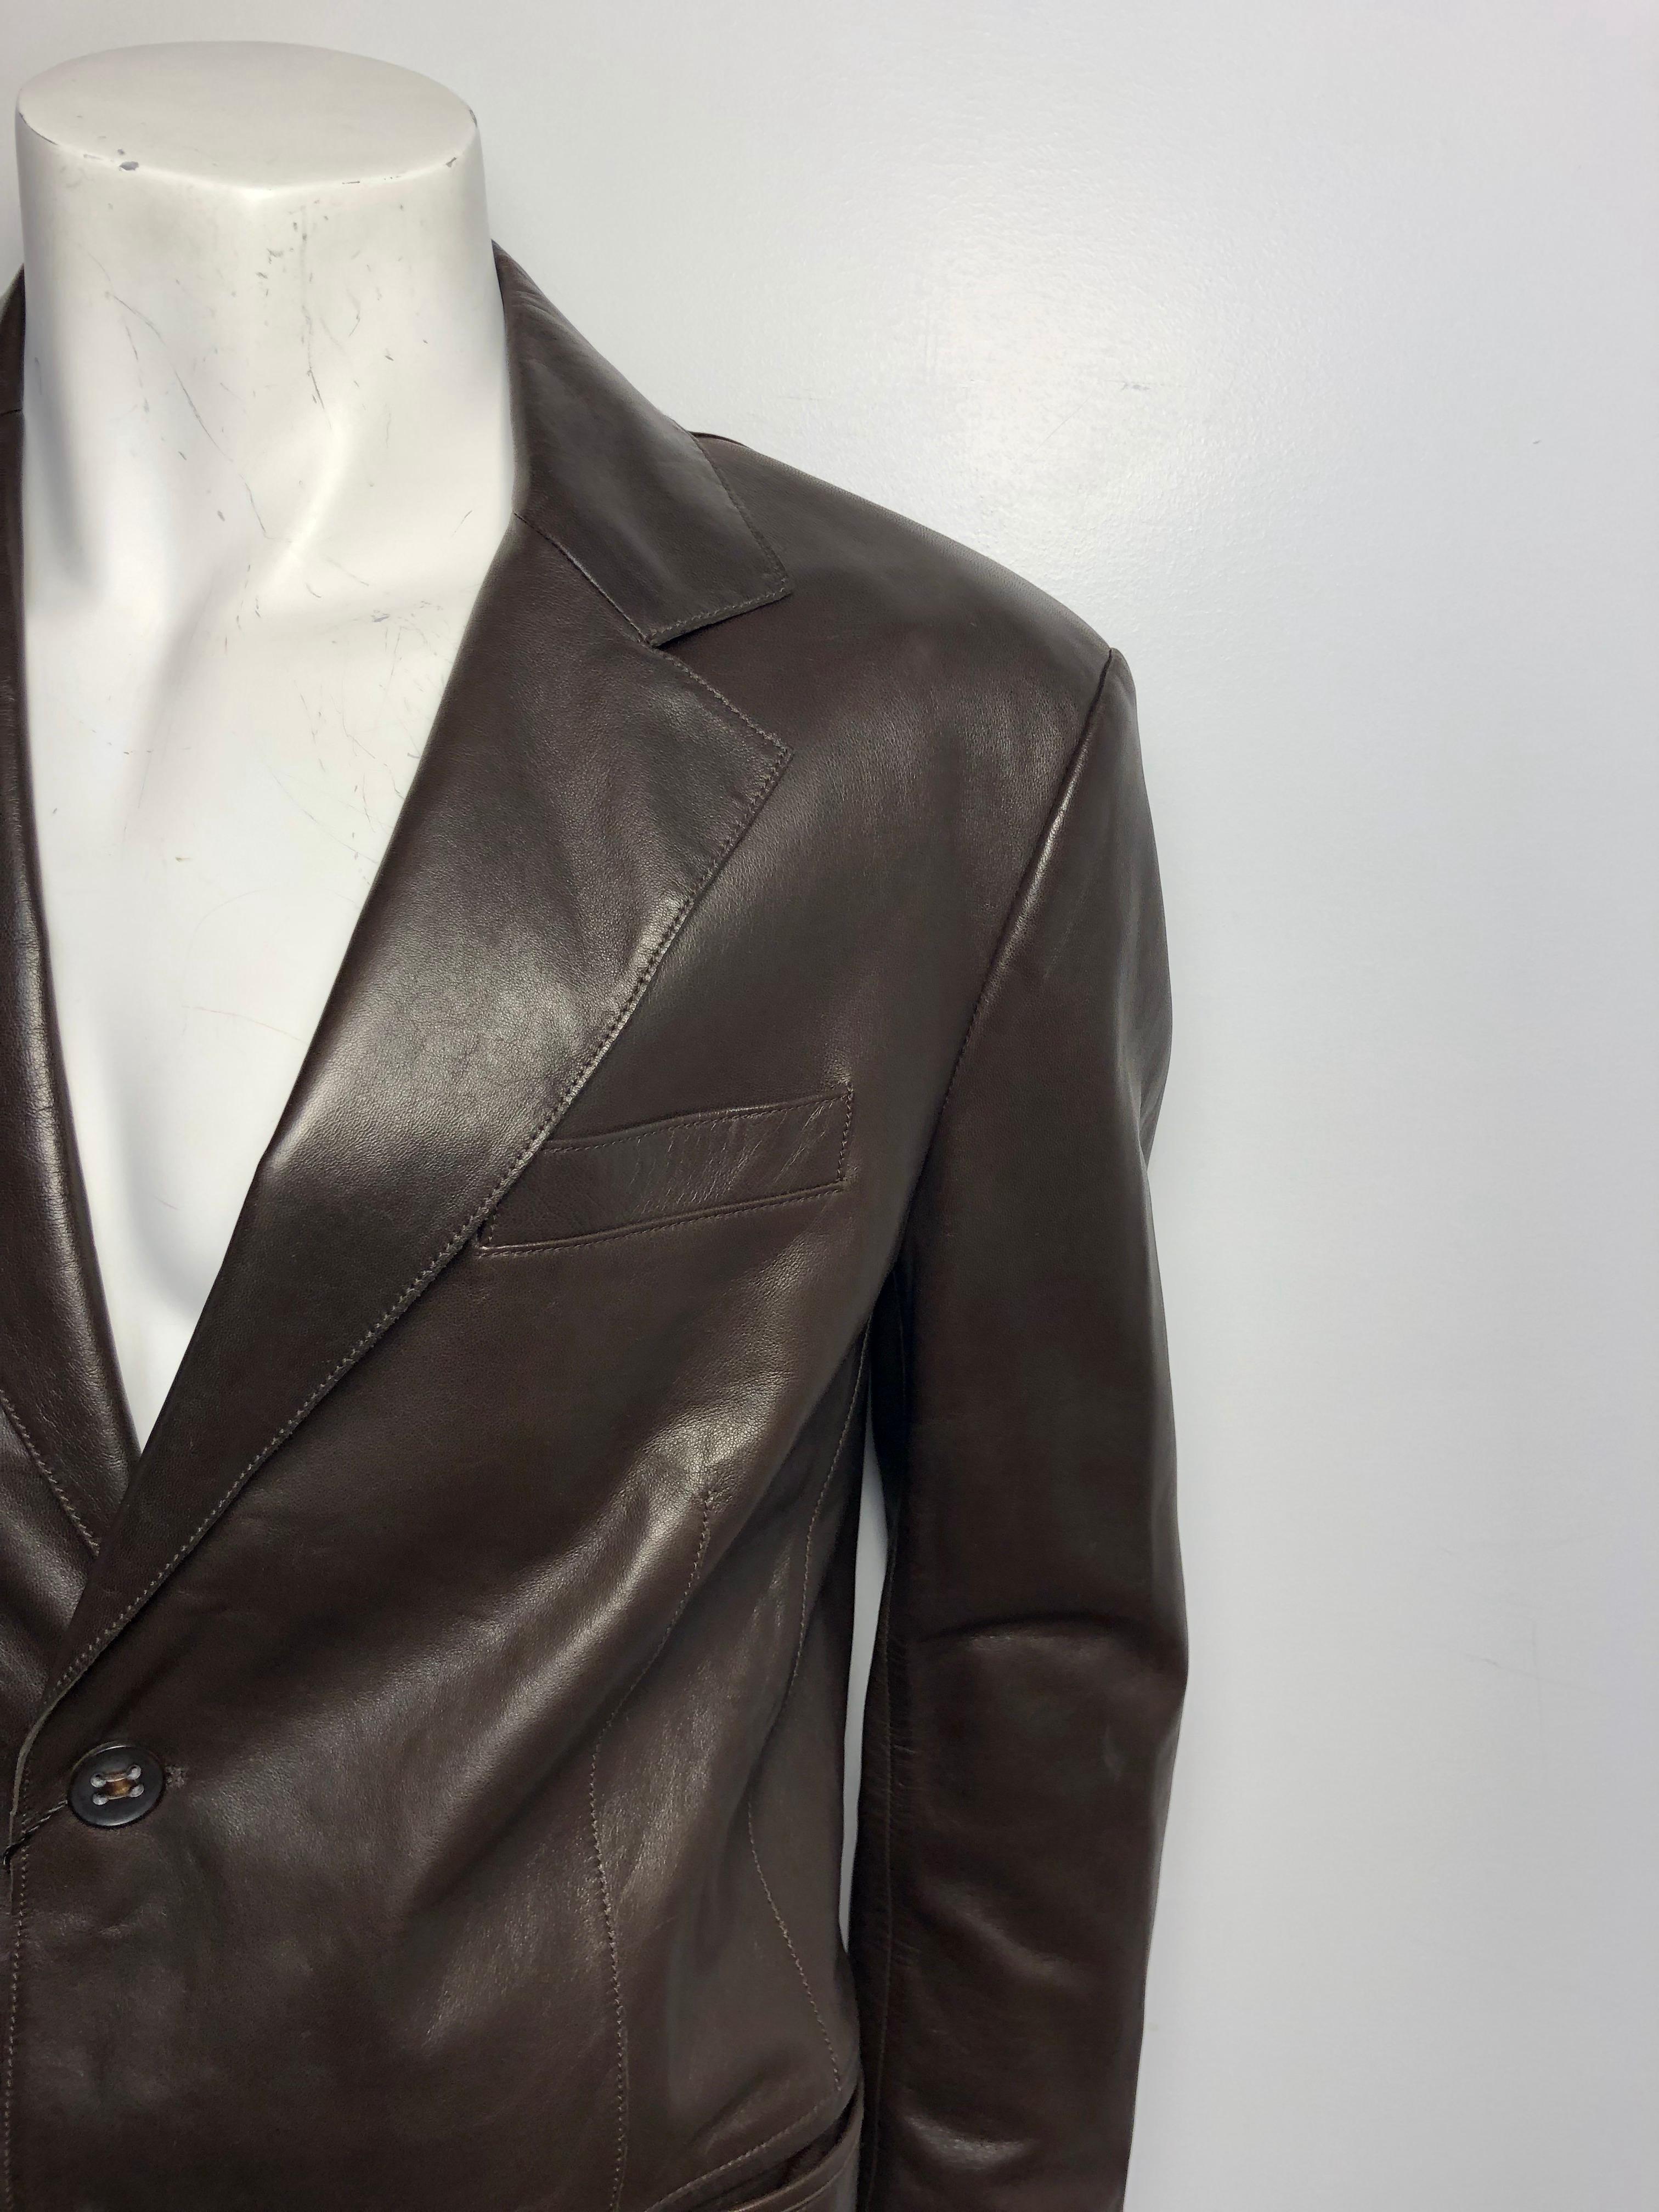 Giorgio Armani
Chocolate Leather Jacket
2 Button
2 Waist Pockets/ 1 Chest Pocket
Made in Italy
Size 52
NEW WITH TAGS- Retails for $3450